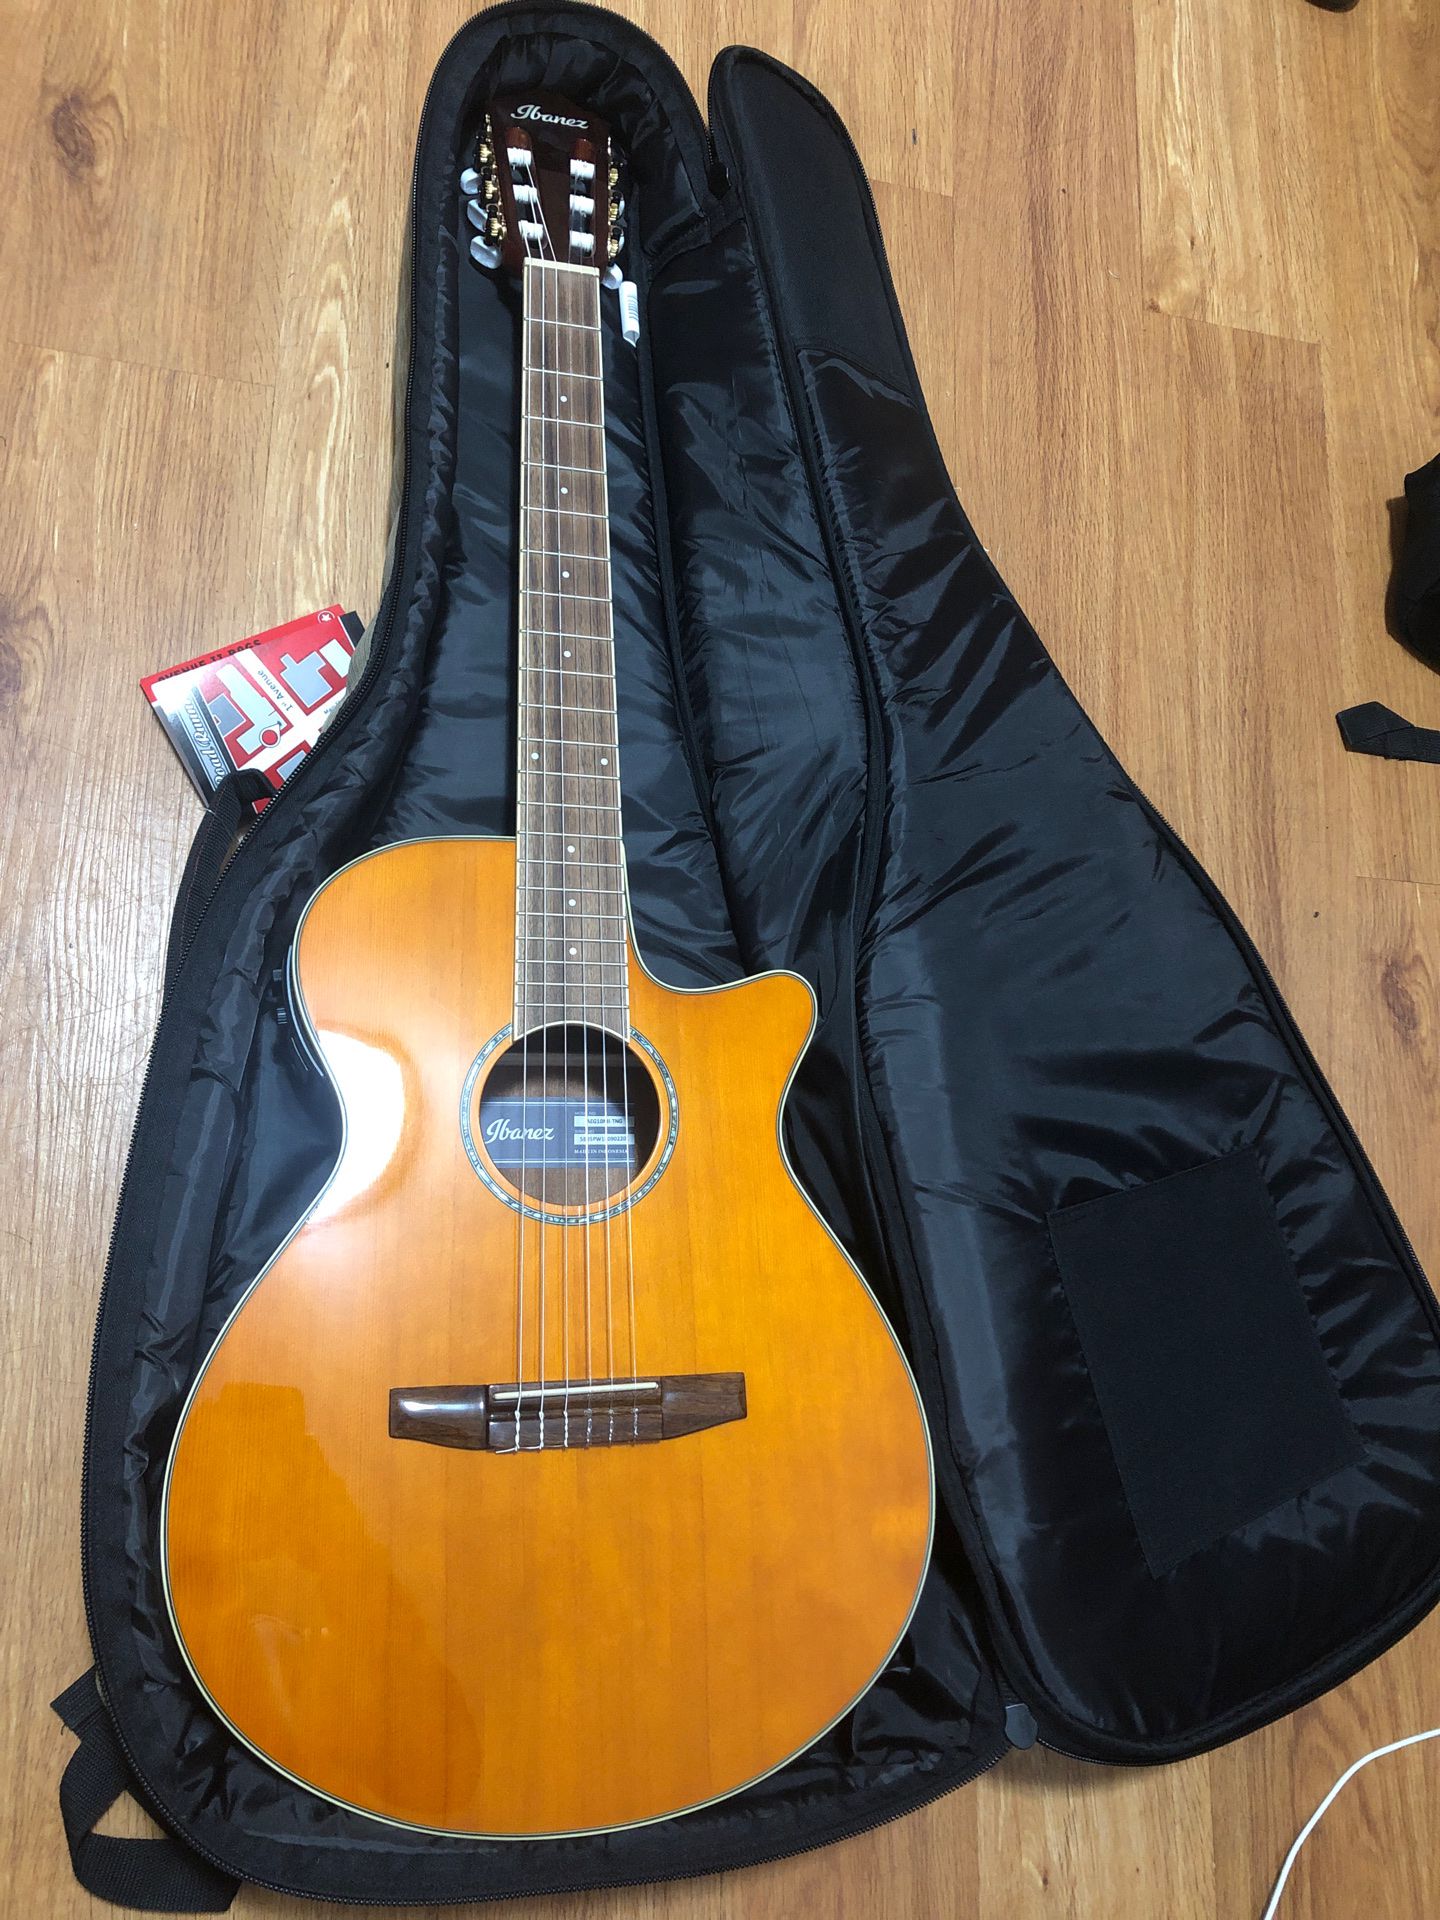 Ibanez Acoustic / Electric guitar